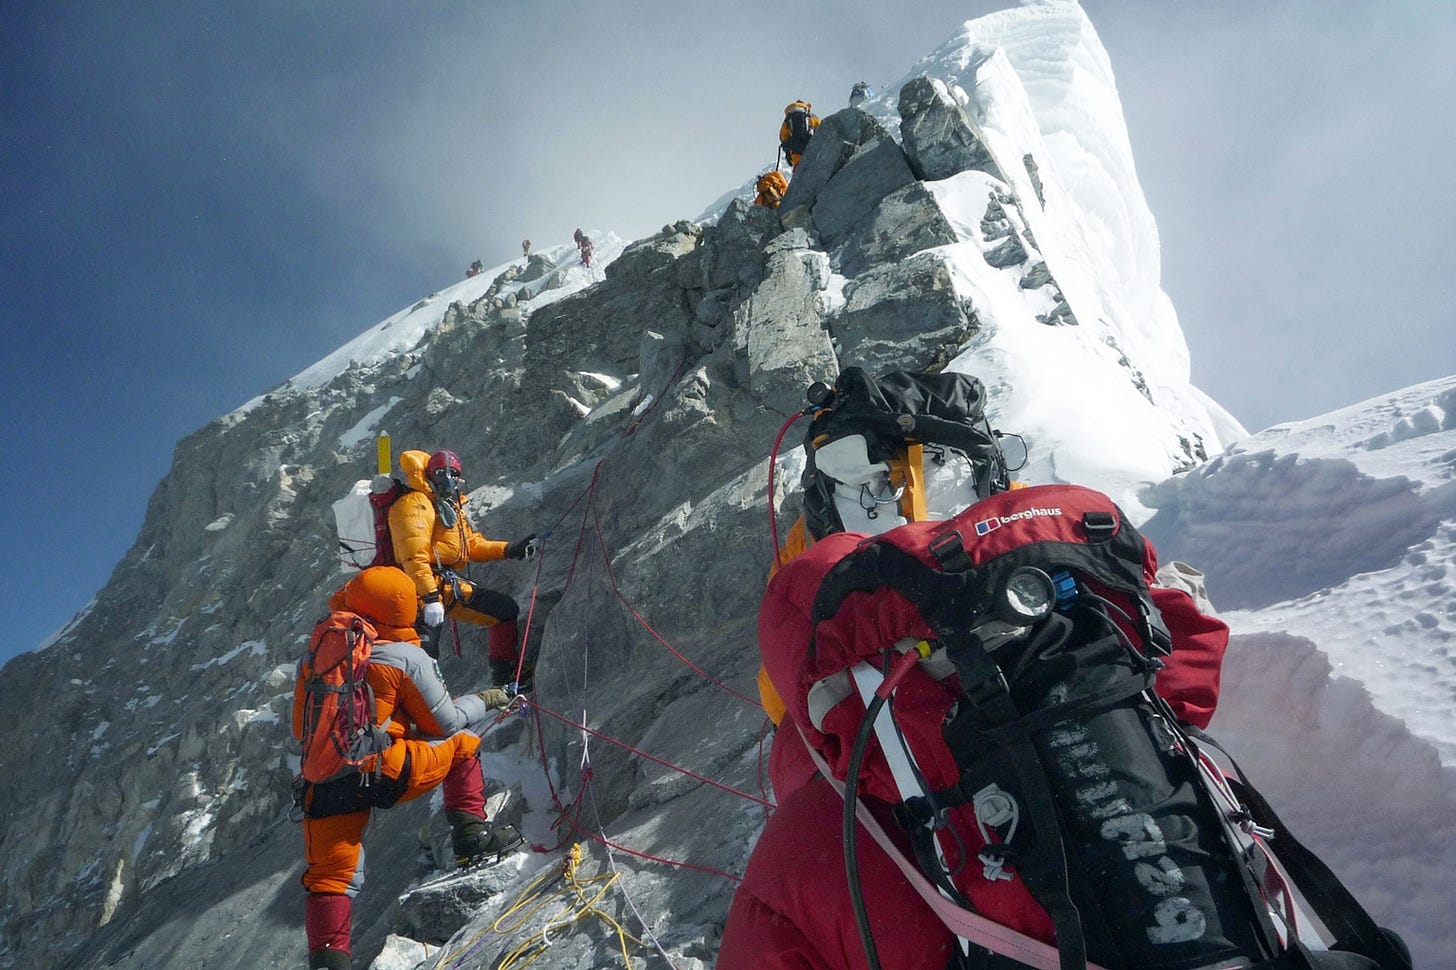 What to know about climbing Mount Everest